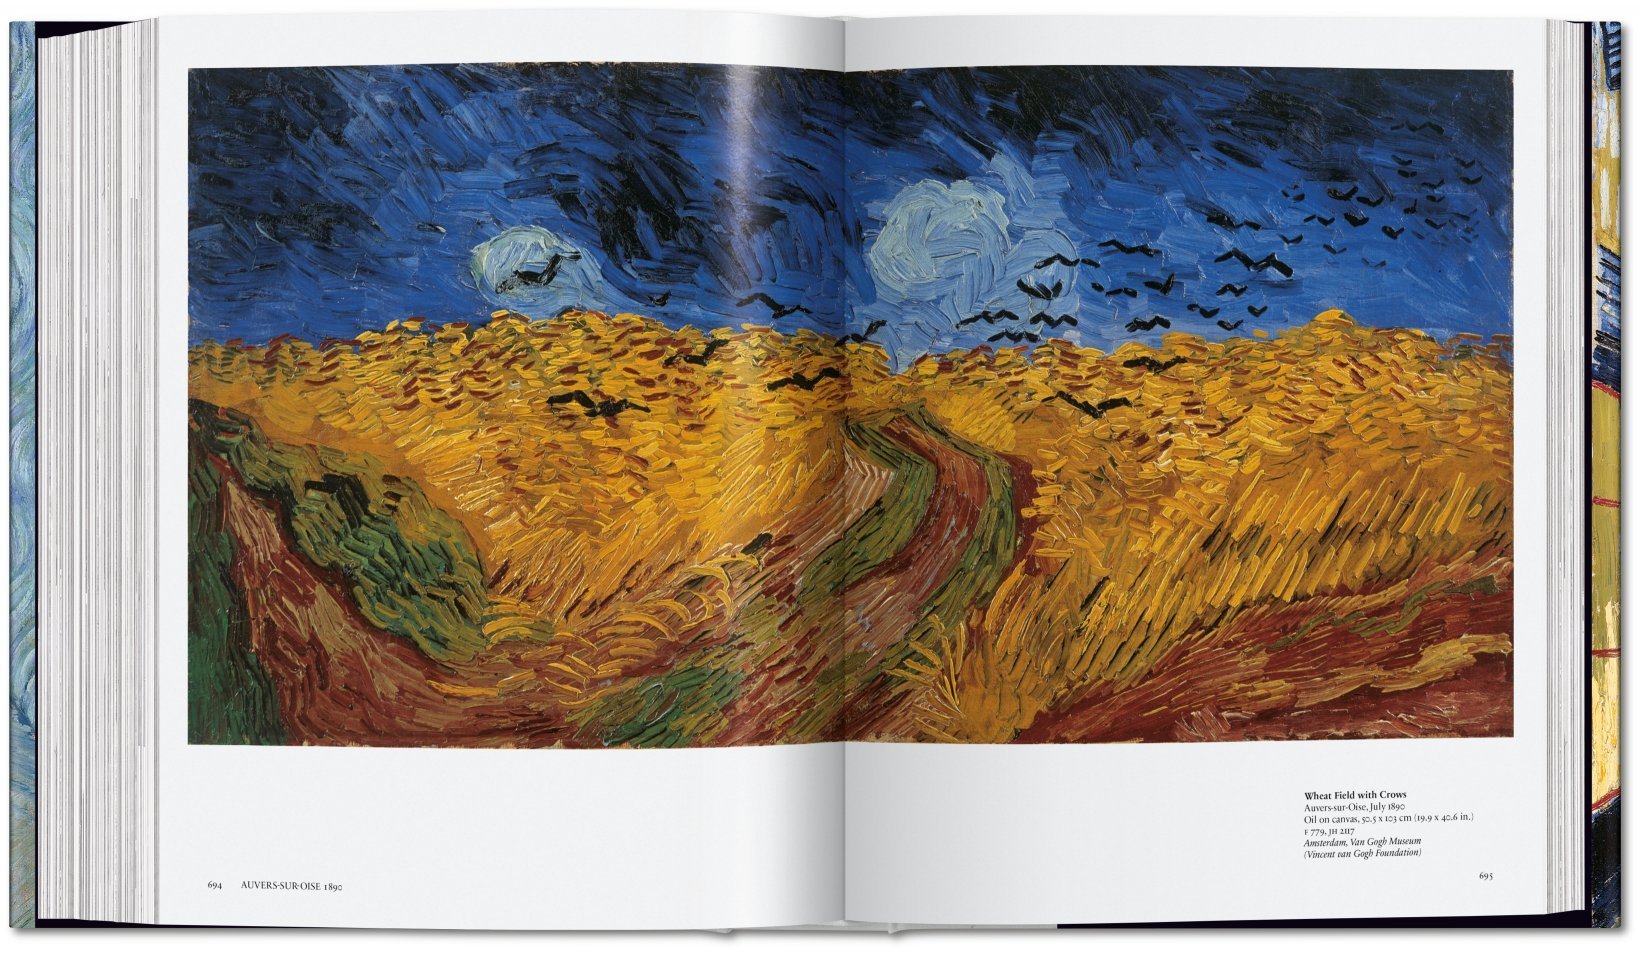 Artbook - Sách Tiếng Anh - Van Gogh: The Complete Paintings